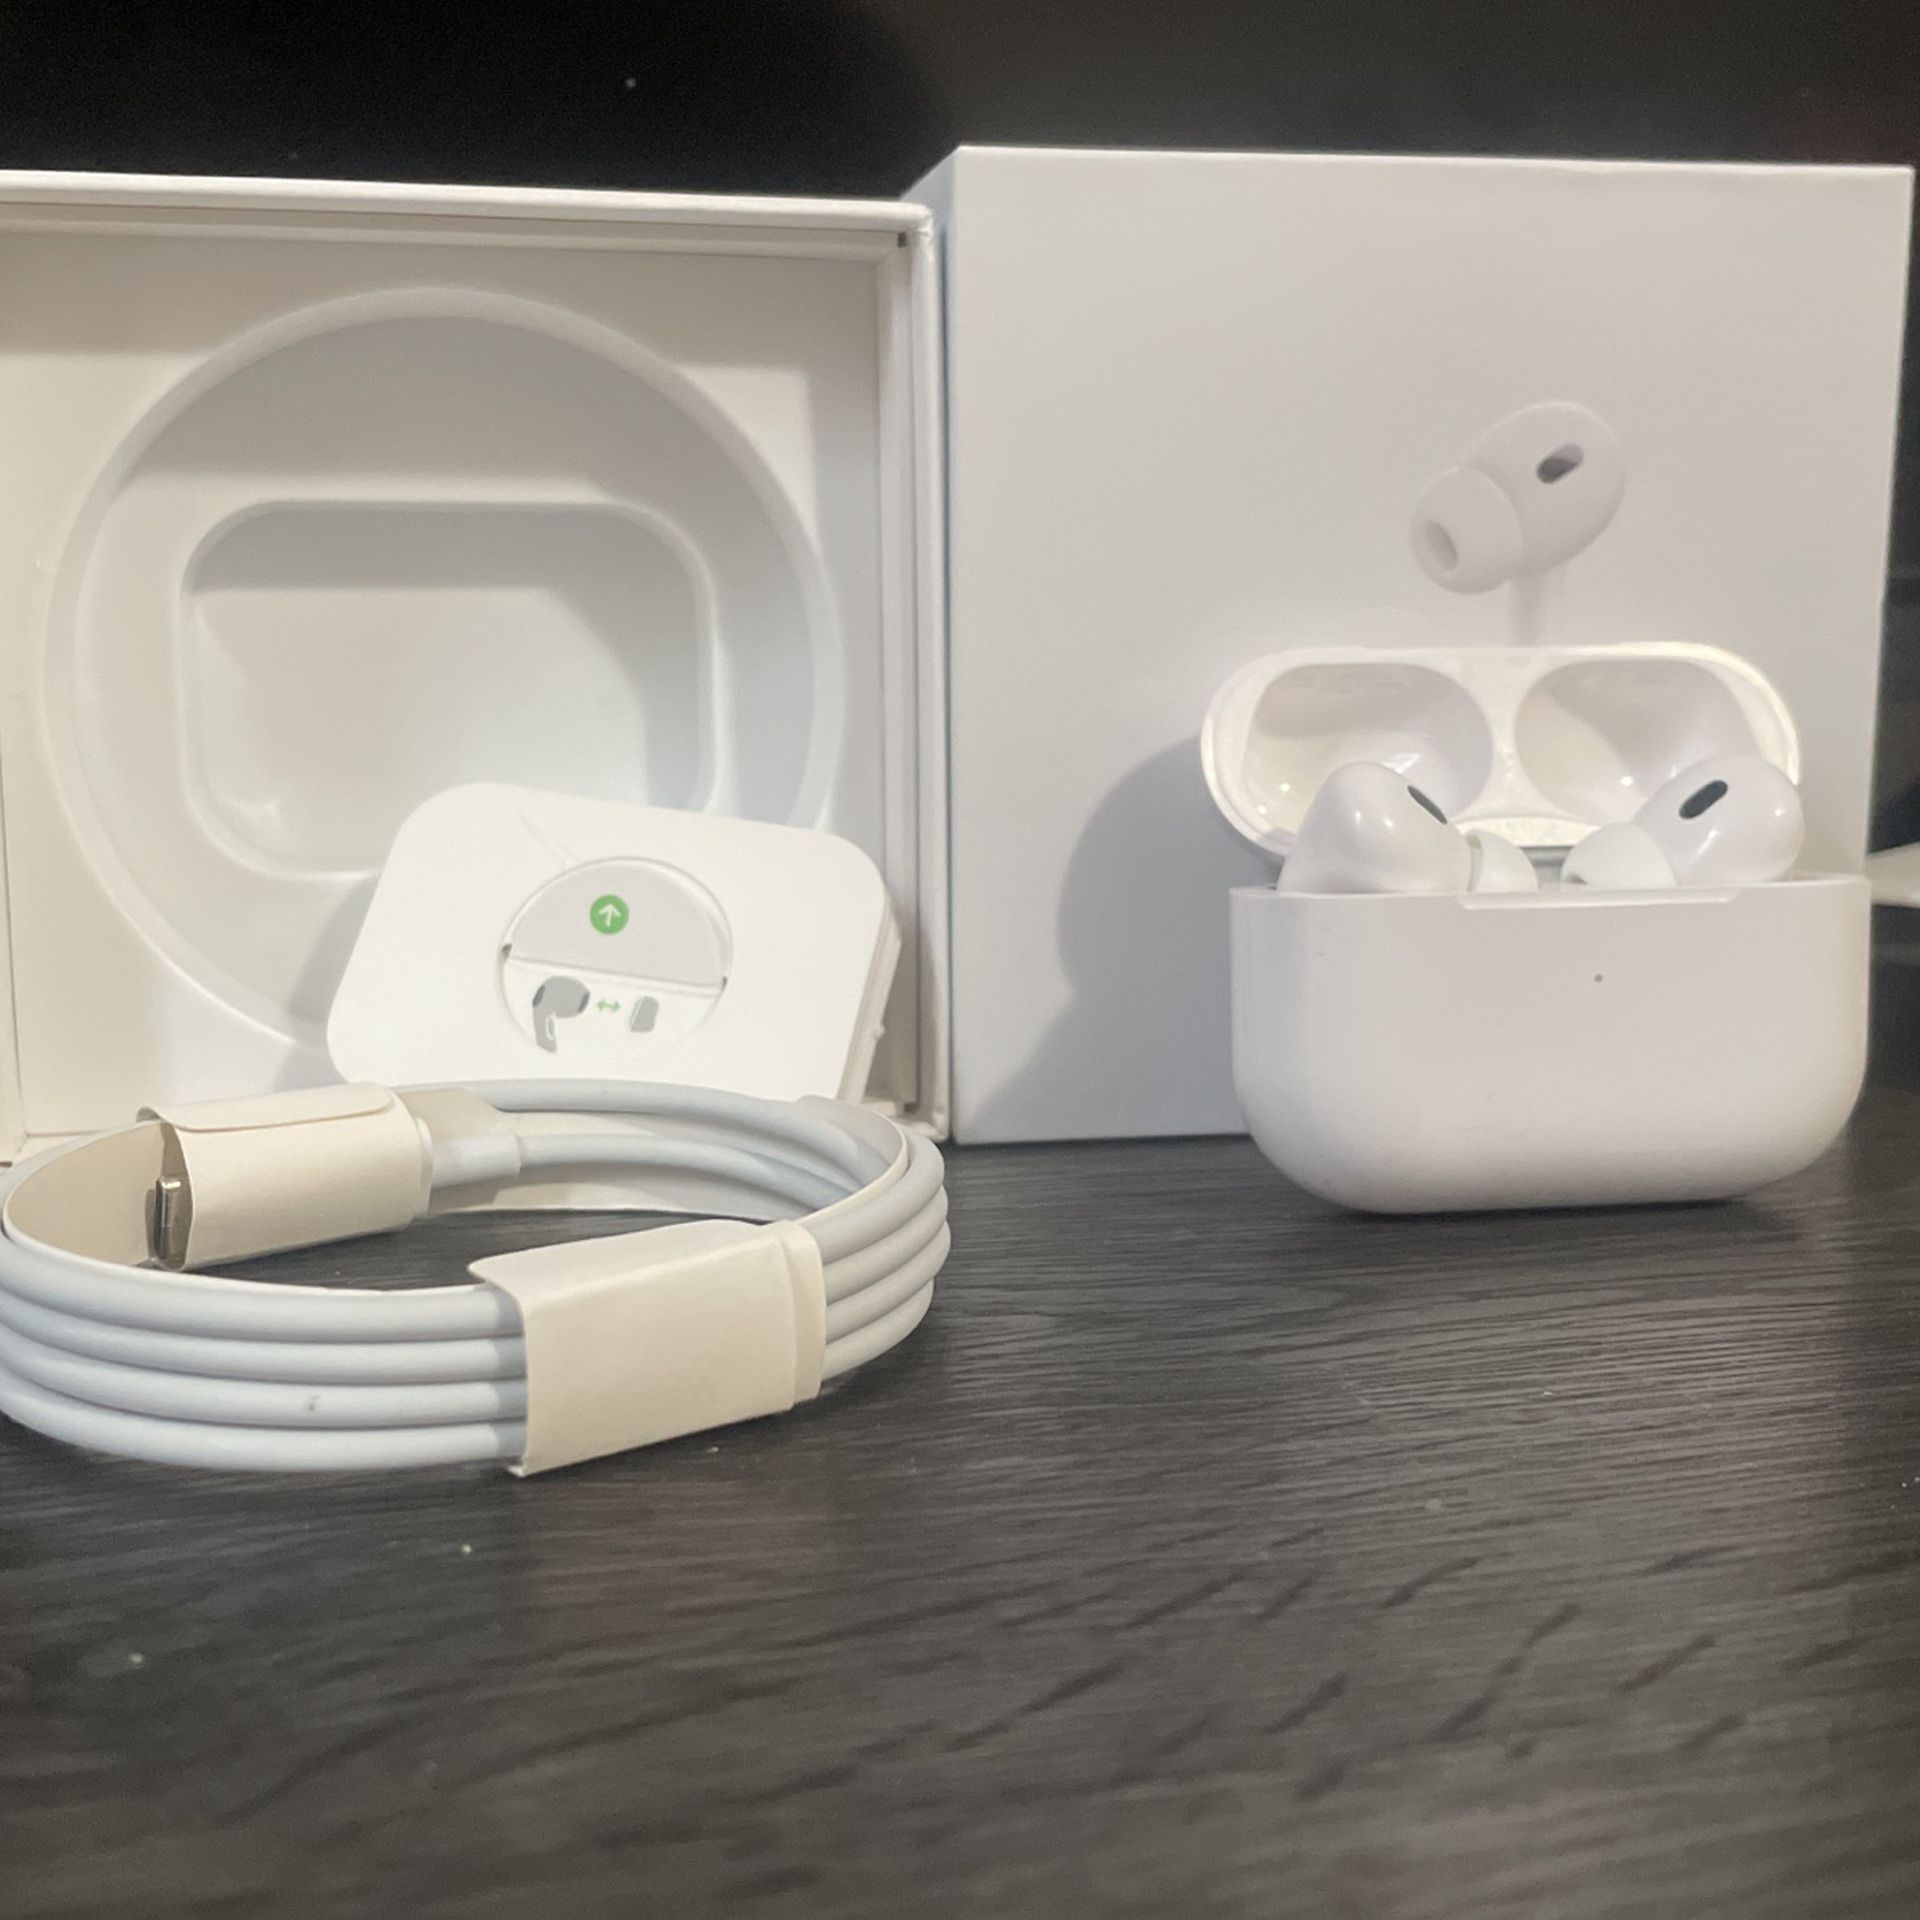 Apple AirPods Pro with Wireless Charging Case - White